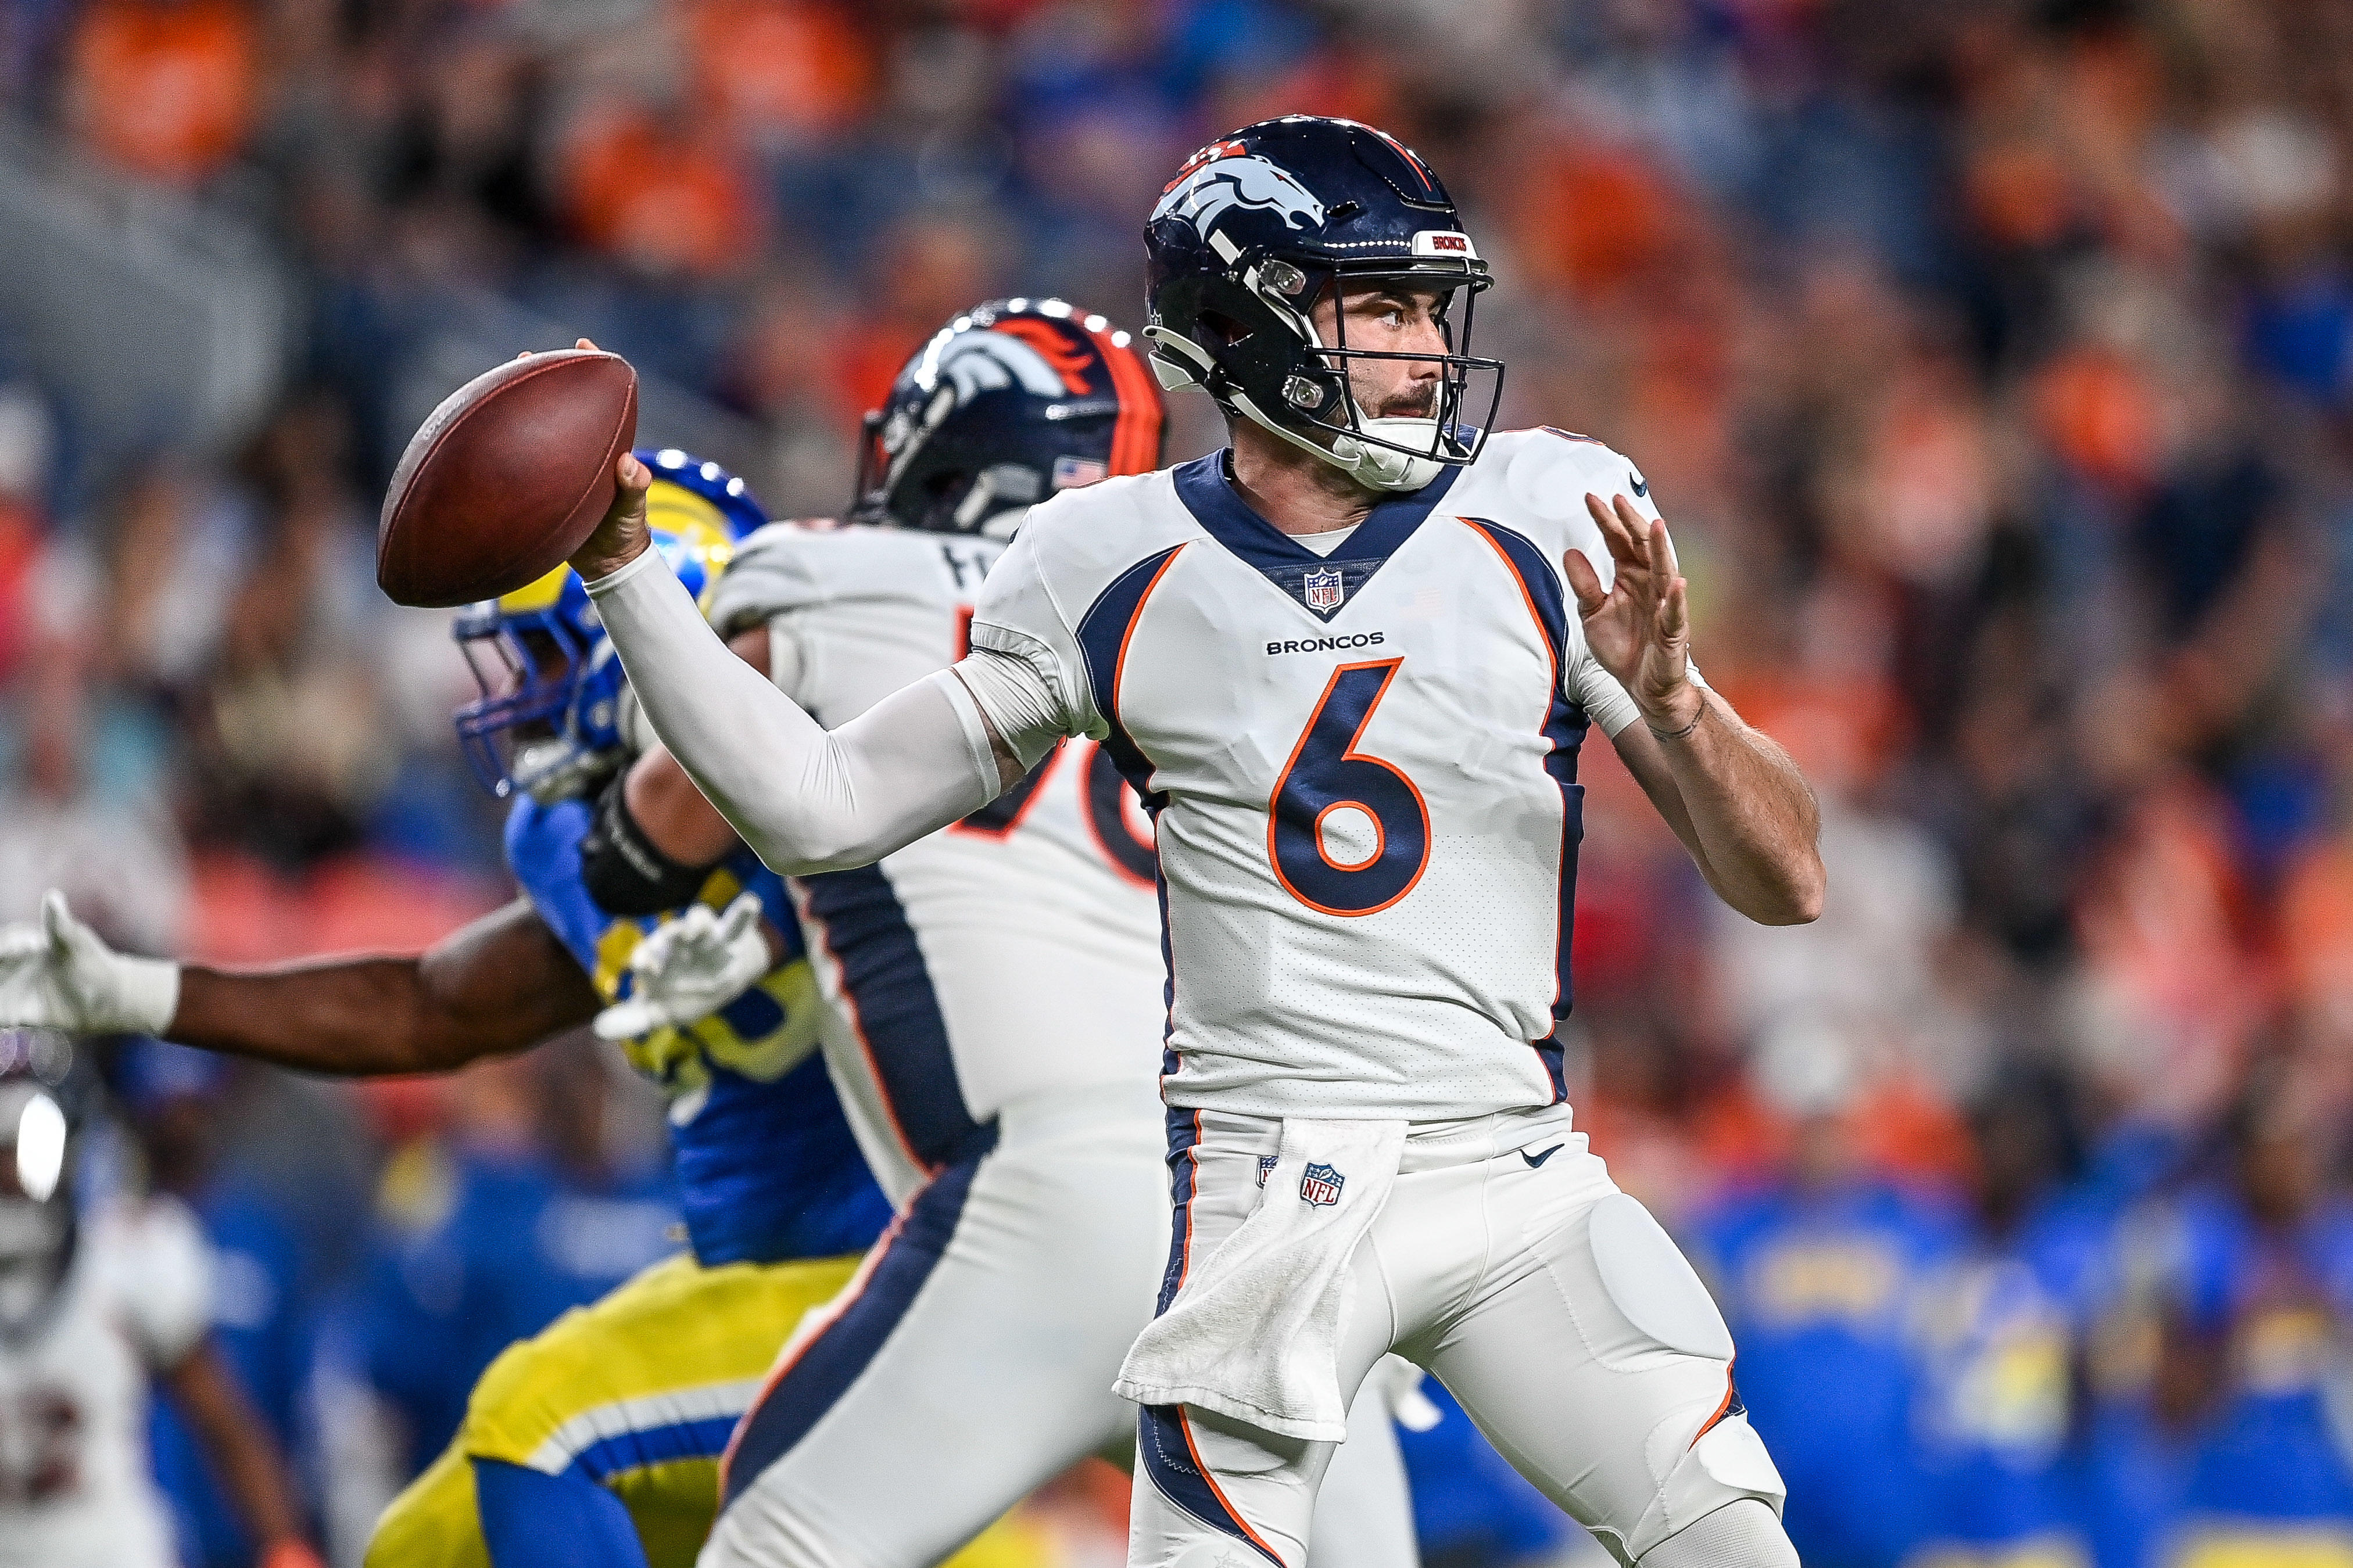 Broncos release former Cowboys QB after trading for Zach Wilson, drafting Bo Nix in first round